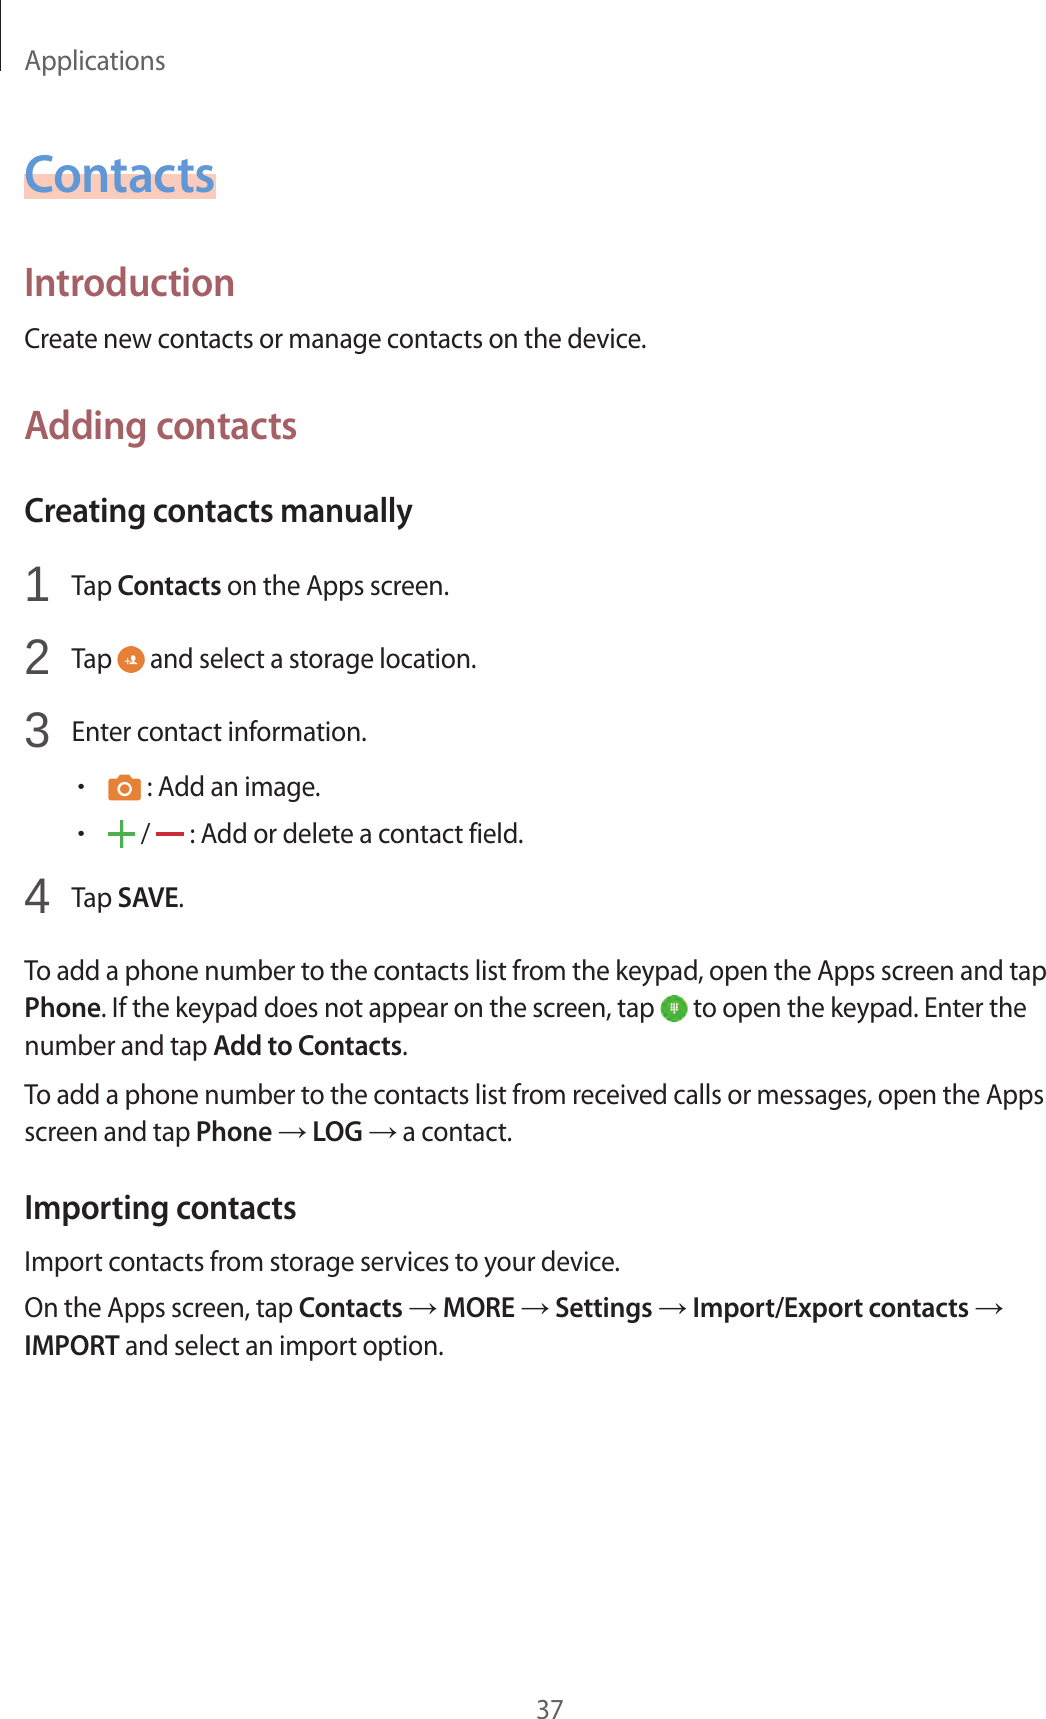 Applications37ContactsIntroductionCreate new contacts or manage contacts on the device.Adding contactsCreating contacts manually1  Tap Contacts on the Apps screen.2  Tap   and select a storage location.3  Enter contact information.• : Add an image.• /   : Add or delete a contact field.4  Tap SAVE.To add a phone number to the contacts list from the keypad, open the Apps screen and tap Phone. If the keypad does not appear on the screen, tap   to open the keypad. Enter the number and tap Add to Contacts.To add a phone number to the contacts list from received calls or messages, open the Apps screen and tap Phone → LOG → a contact.Importing contactsImport contacts from storage services to your device.On the Apps screen, tap Contacts → MORE → Settings → Import/Export contacts → IMPORT and select an import option.